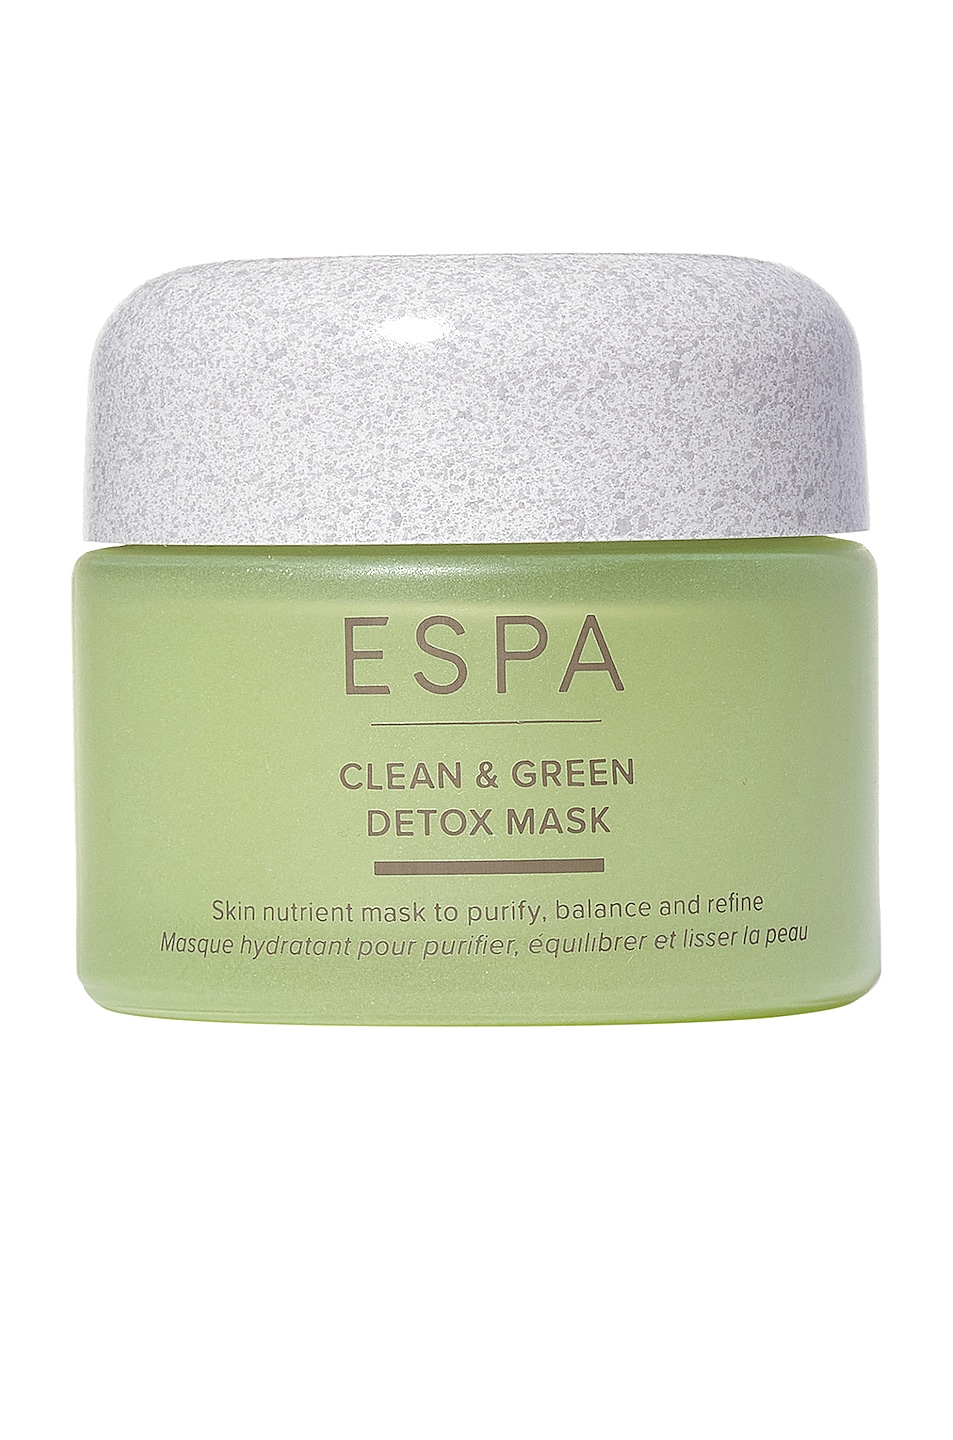 Active Nutrients Clean & Green Detox Mask in Beauty: NA